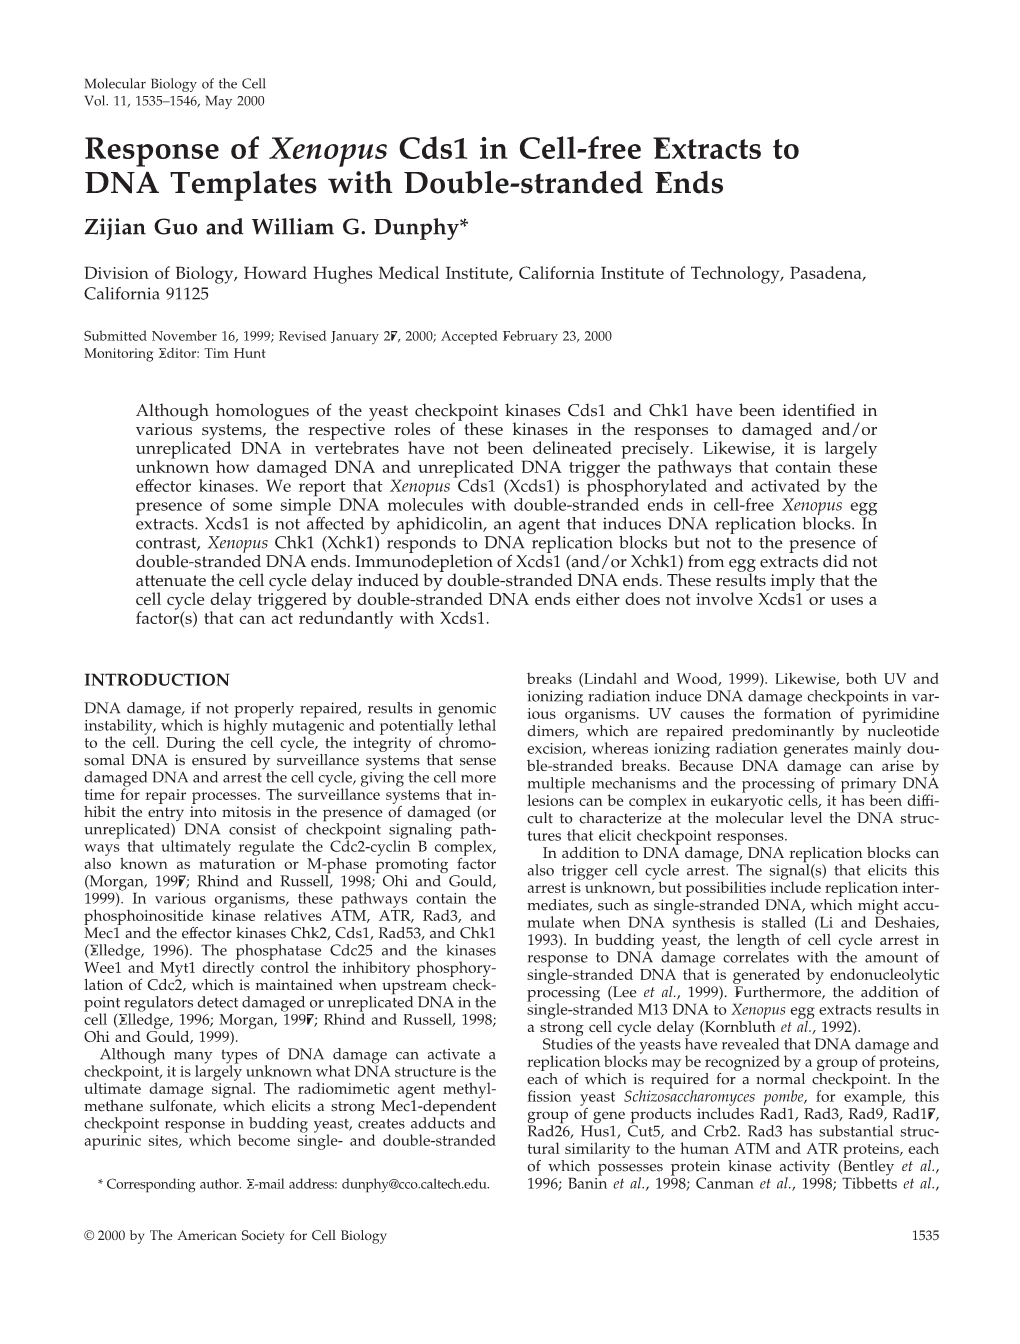 Response of Xenopus Cds1 in Cell-Free Extracts to DNA Templates with Double-Stranded Ends Zijian Guo and William G